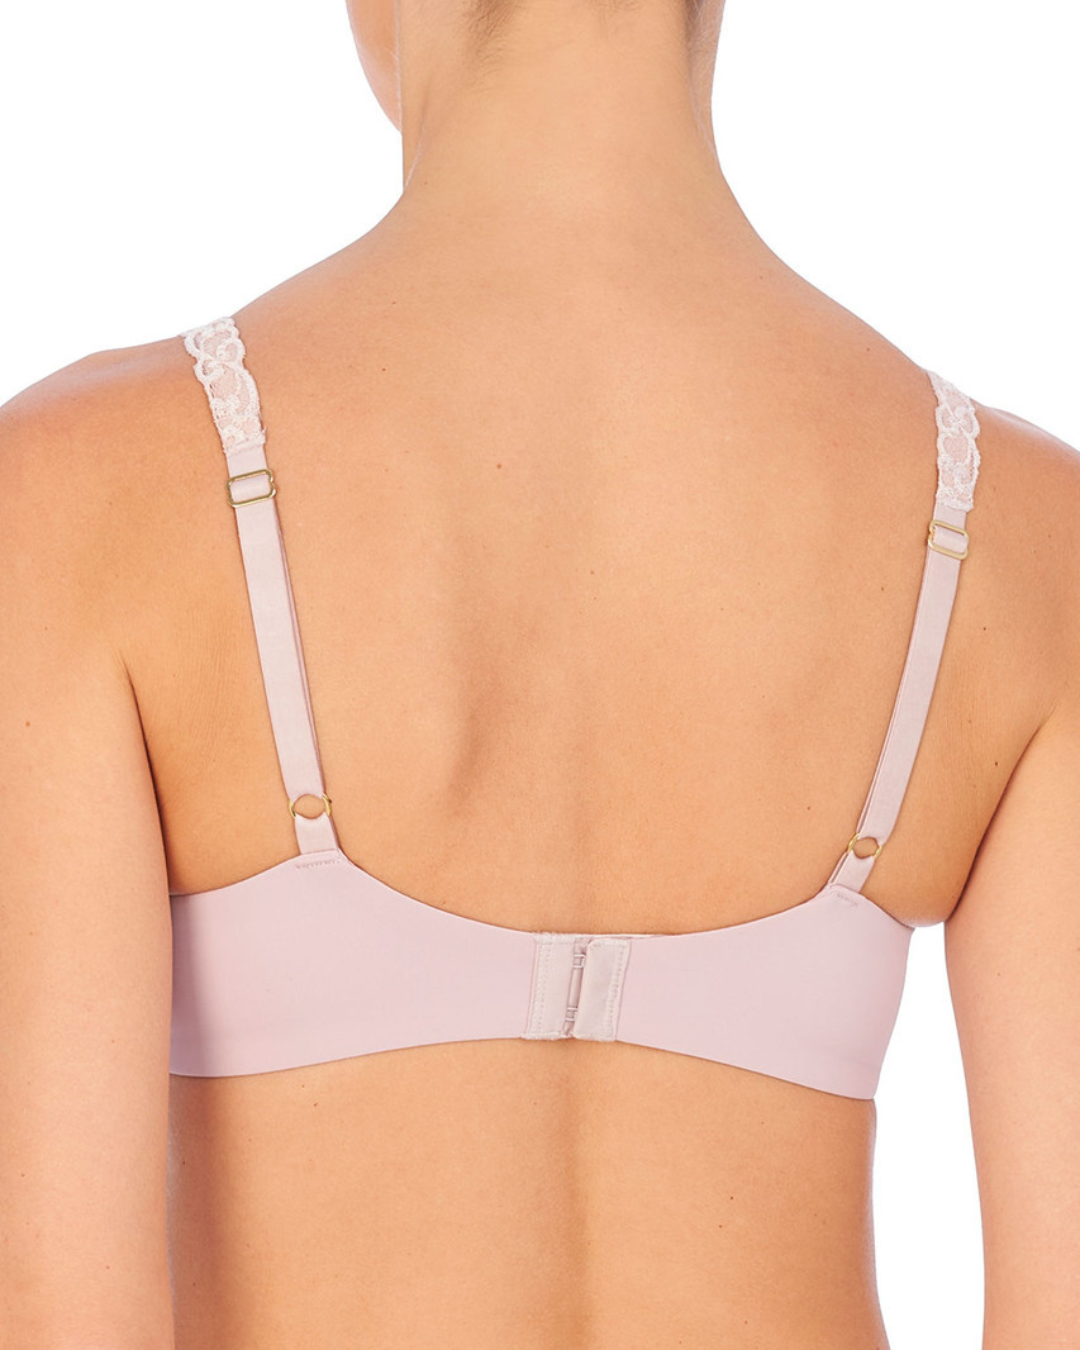 Natori Pure Luxe Molded Underwire Bra (More colors available) - 732080 - Rose Beige